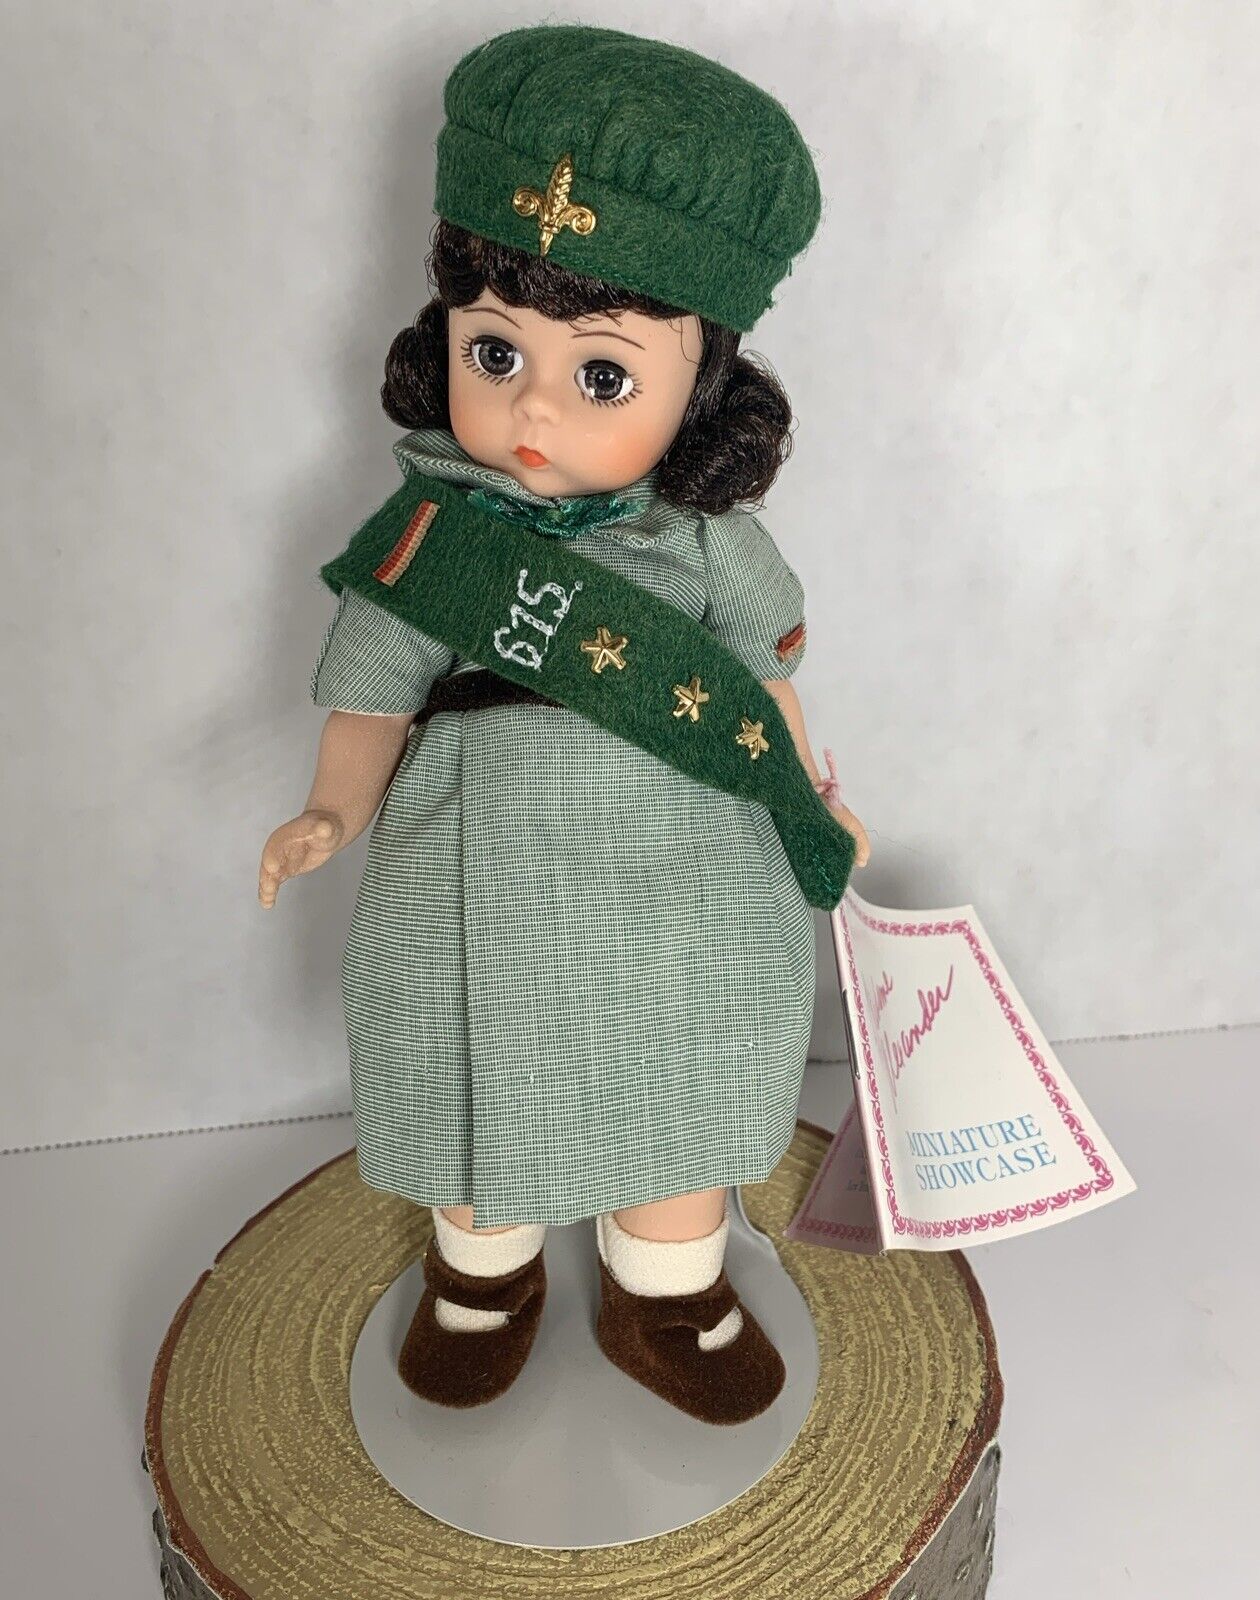 RARE LIMITED EDITION Vintage GIRL SCOUT DOLL MADAME ALEXANDER 1992 “Scouting”